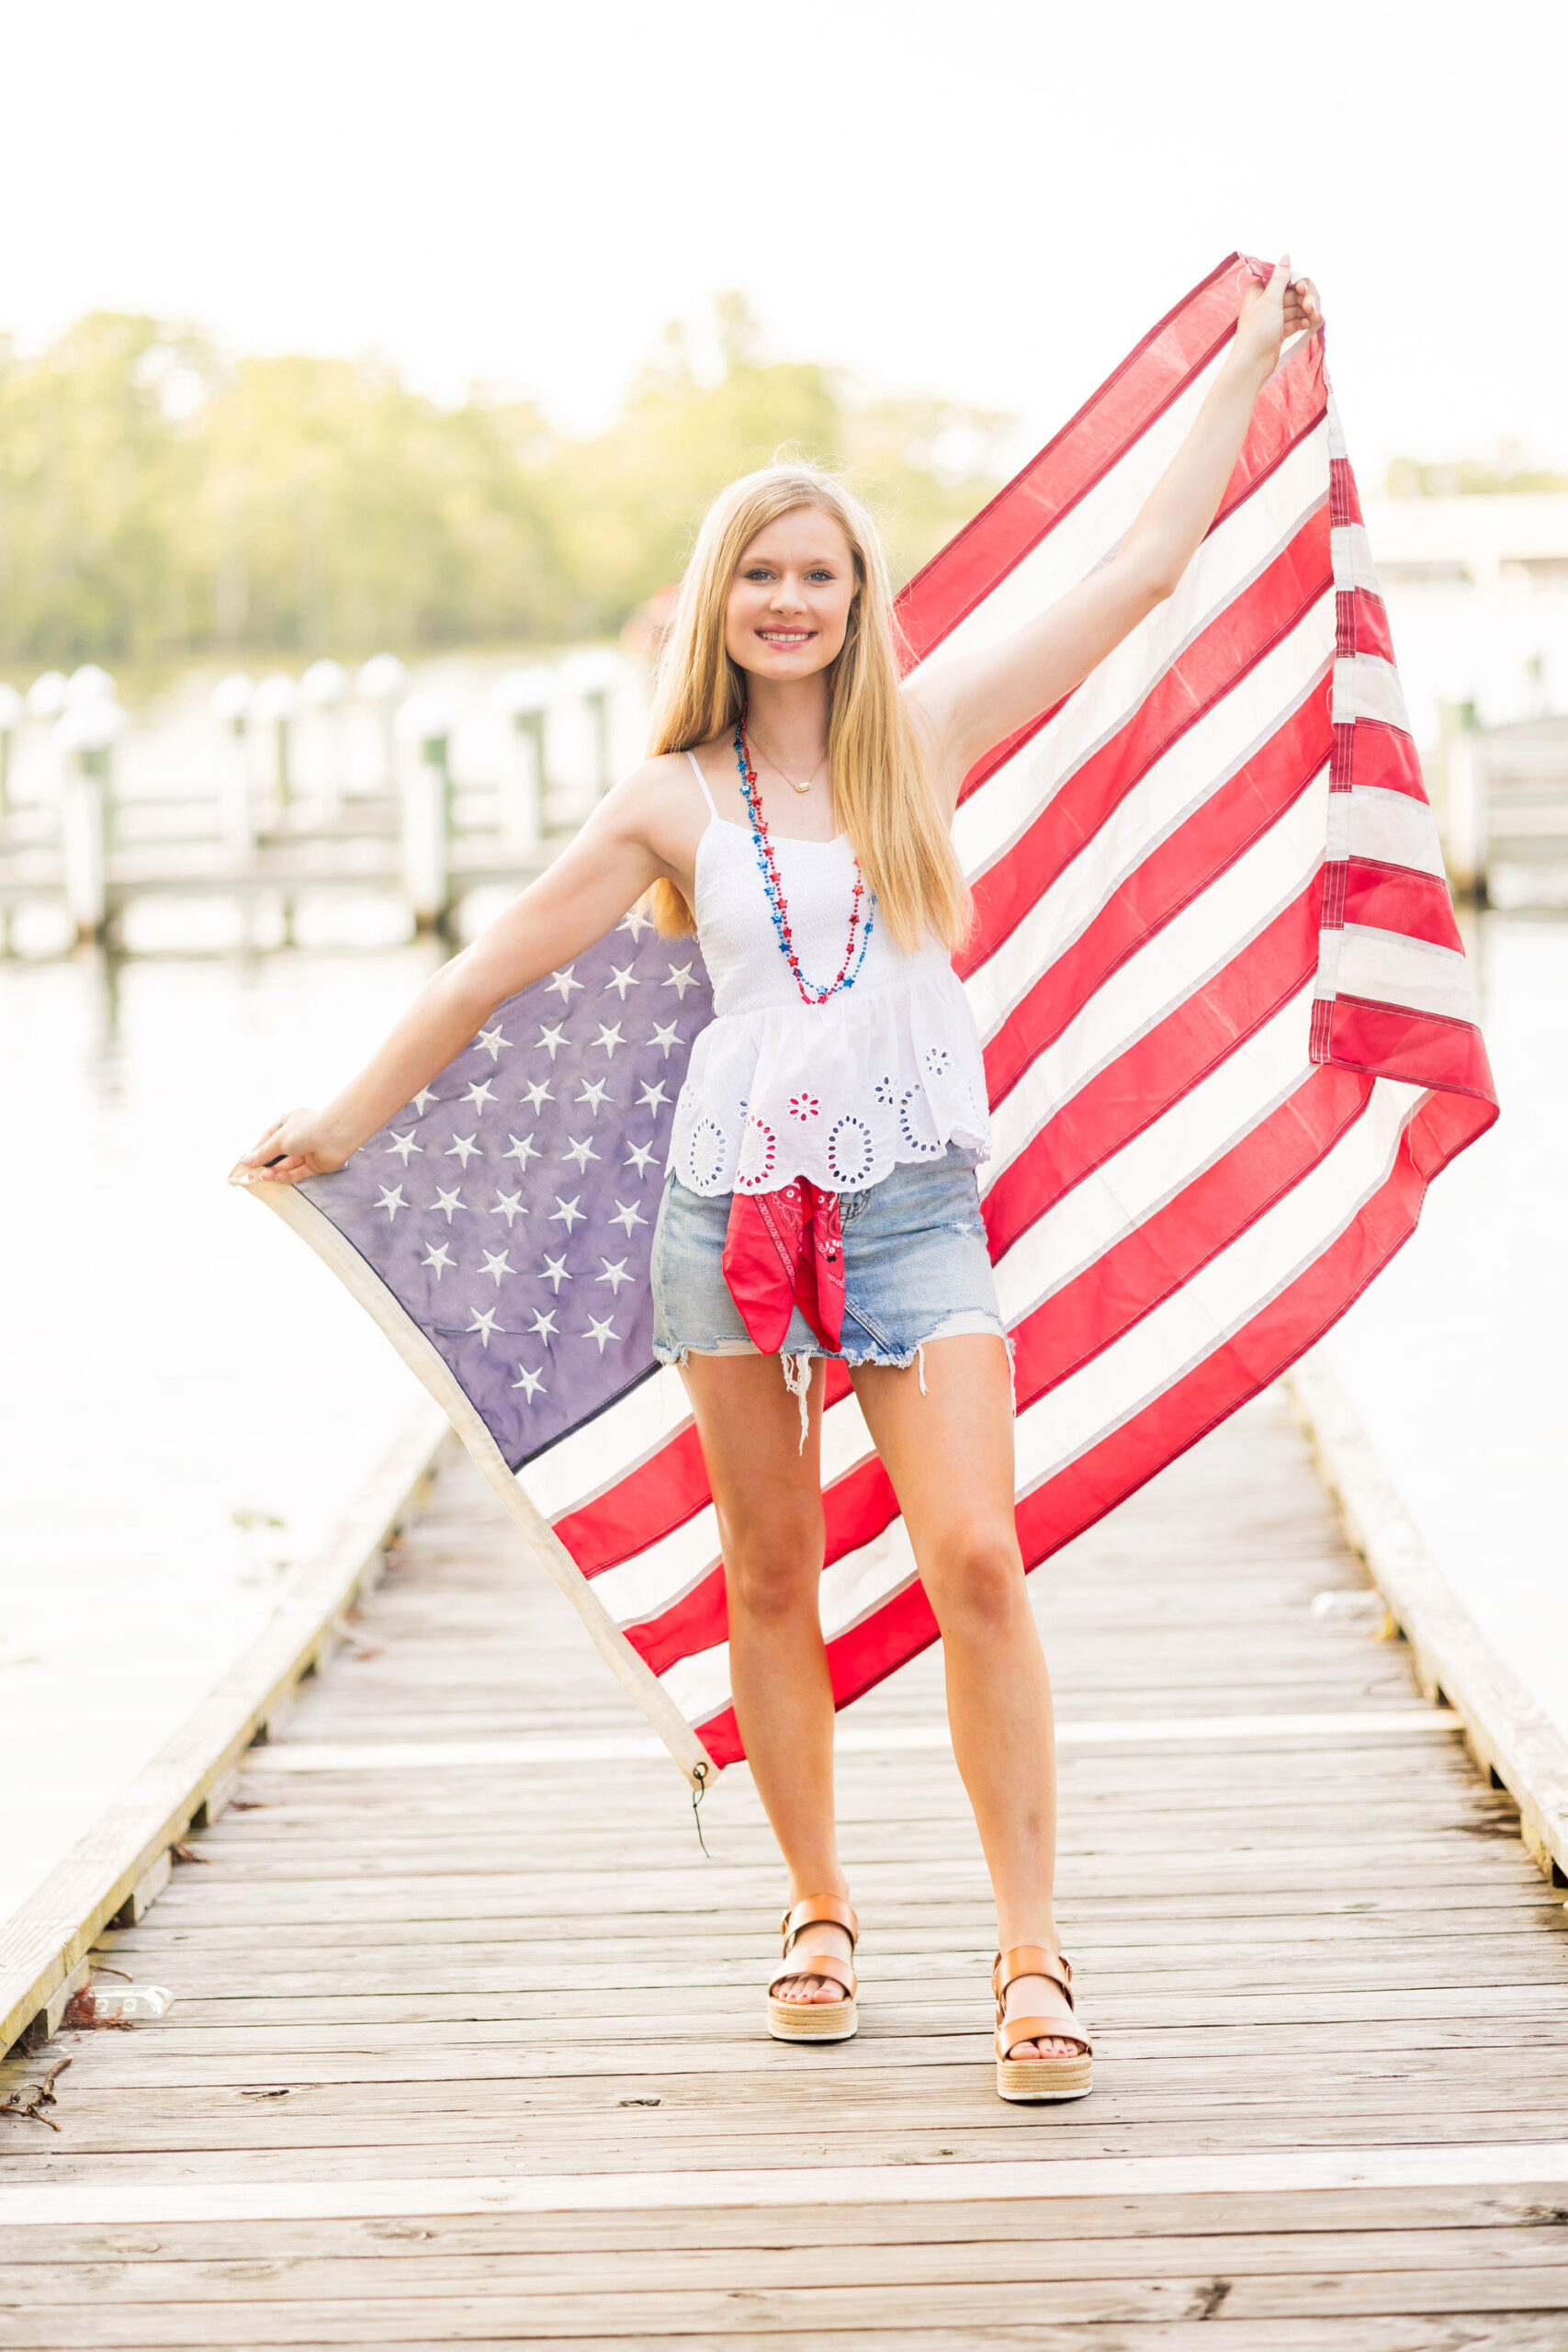 Hertford NC, 4th of July, red white, and blue , American, American flag, 4th of July rep team, class of 2024, America birthday day, Stars and Stripes, USA, senior portraits, senior girl outfits, senior rep team,NC senior photographer, seniors, Hertford NC senior photographer, Nags Head NC Senior Photographer